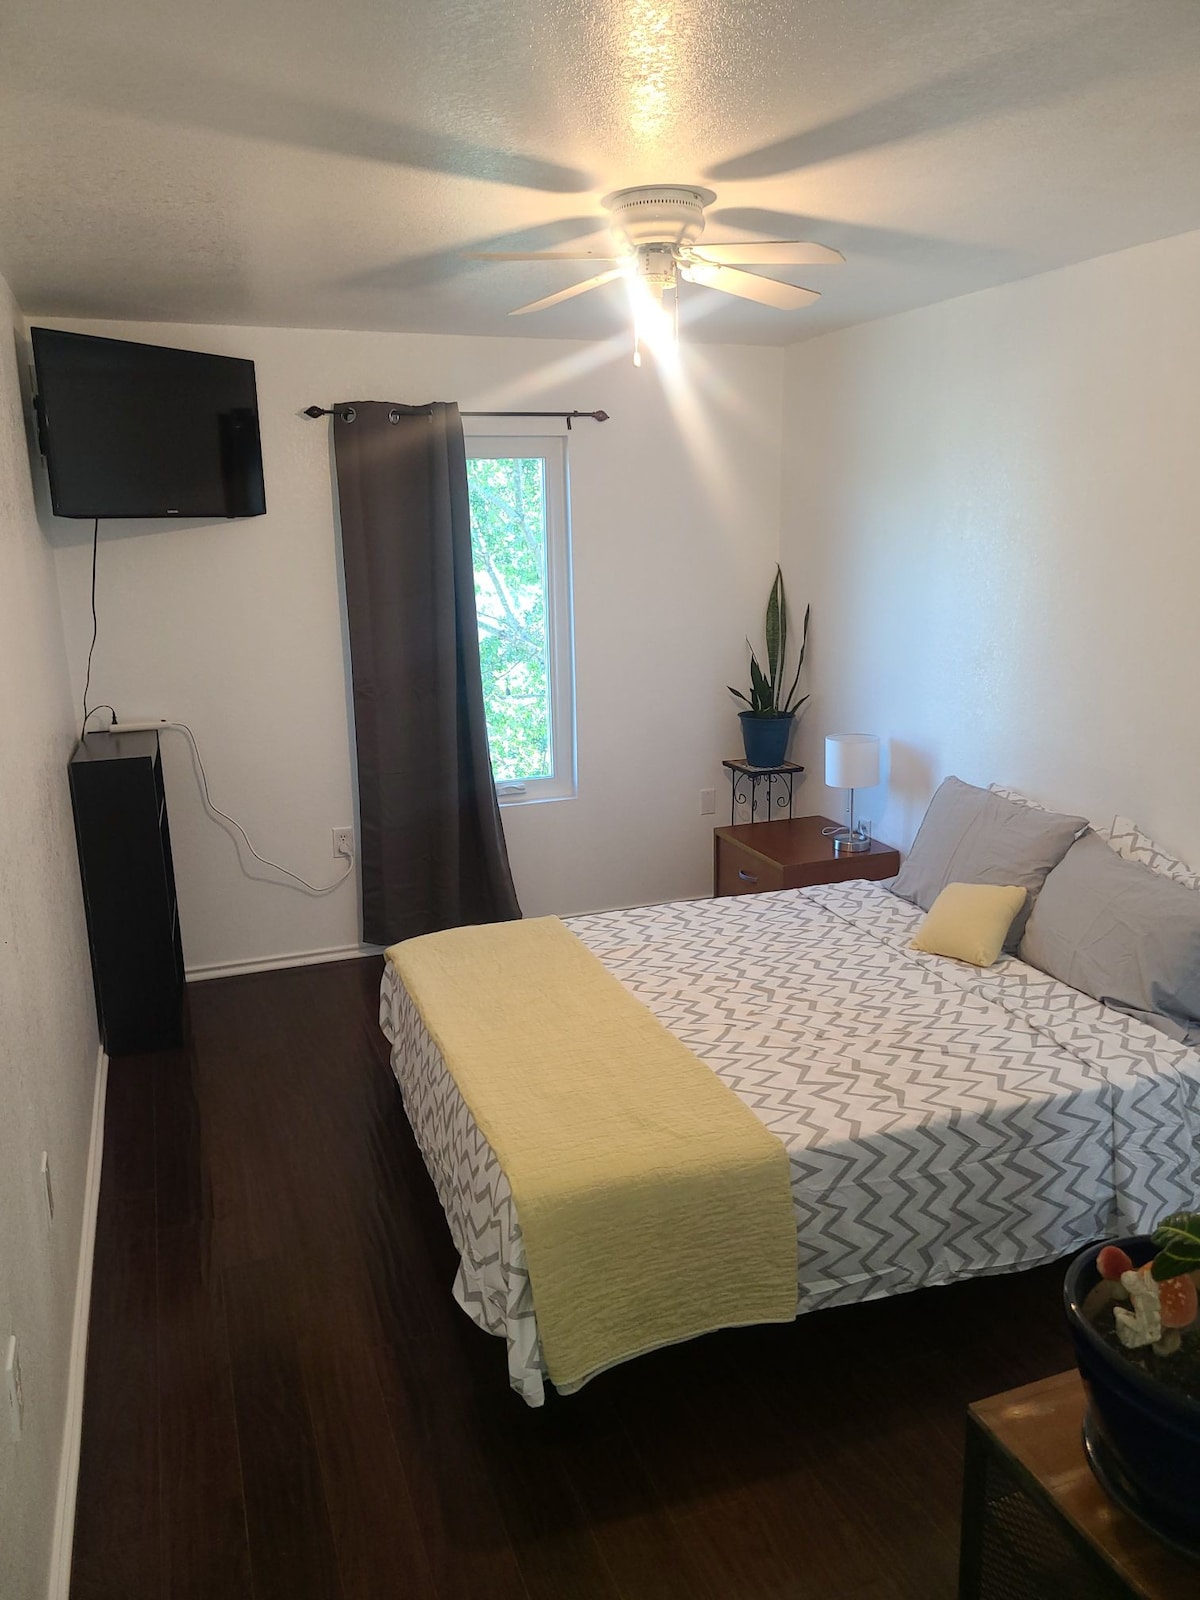 Affordable spot between airport and downtown.